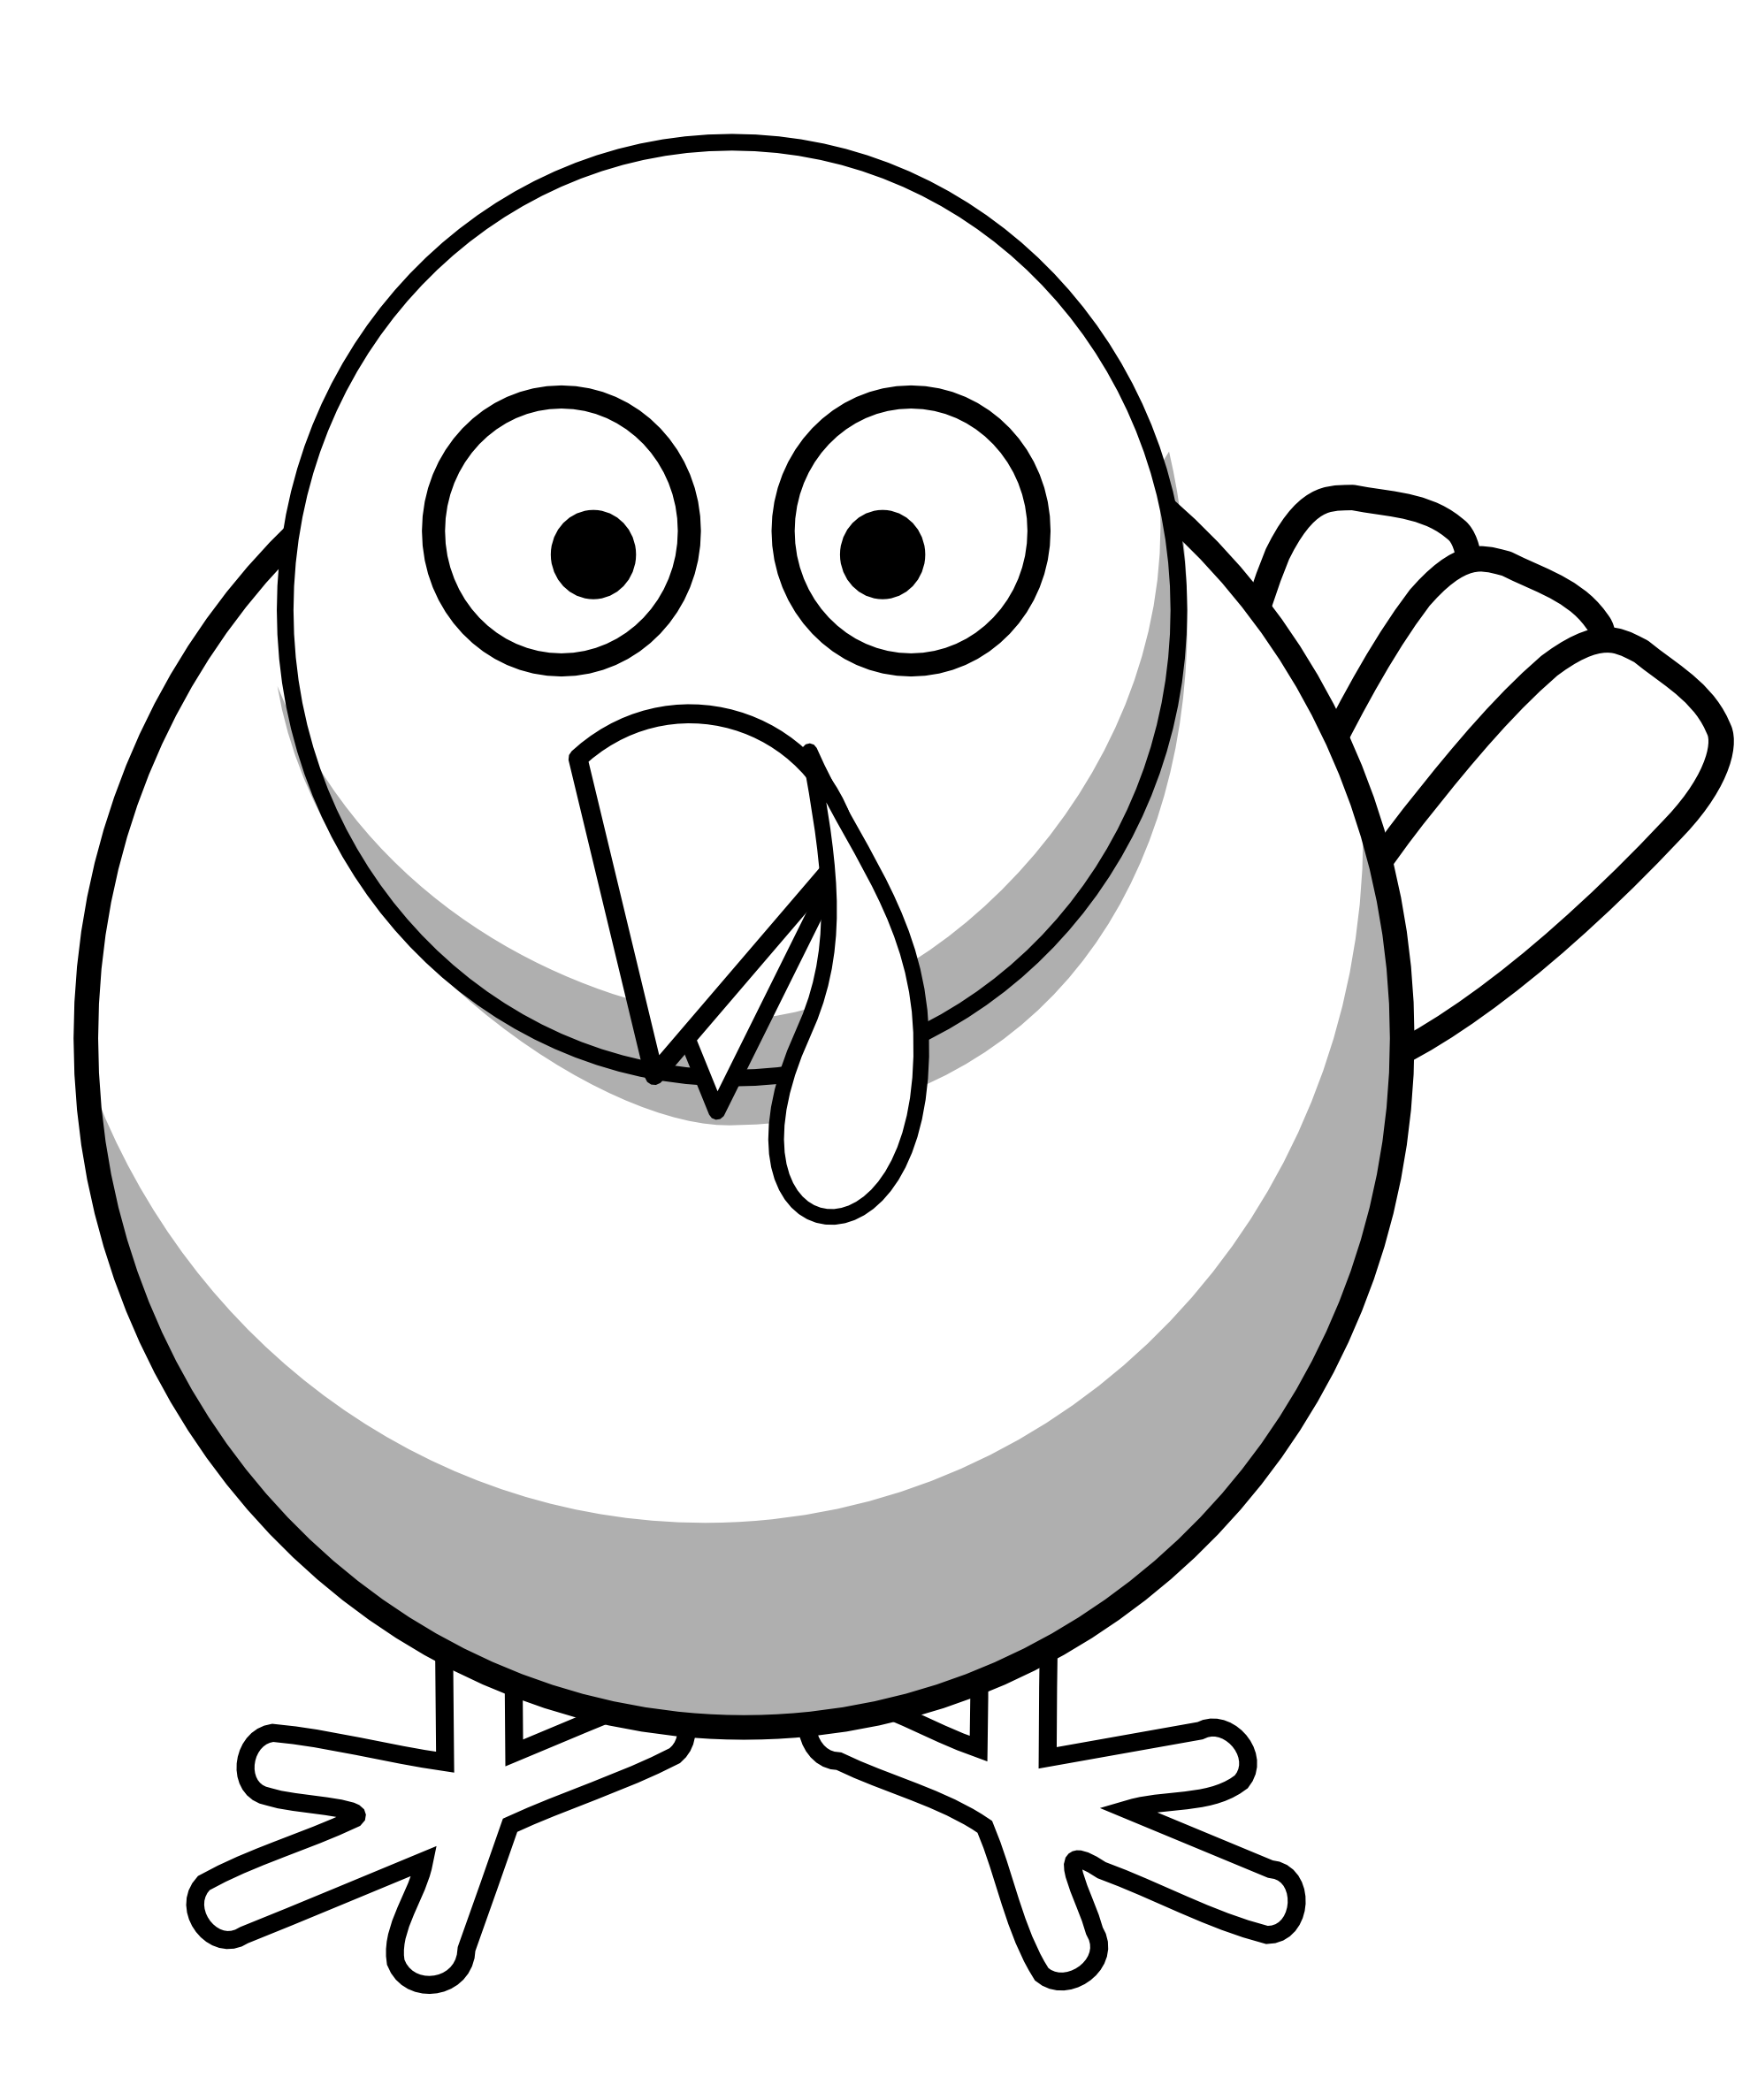 cough clipart black and white